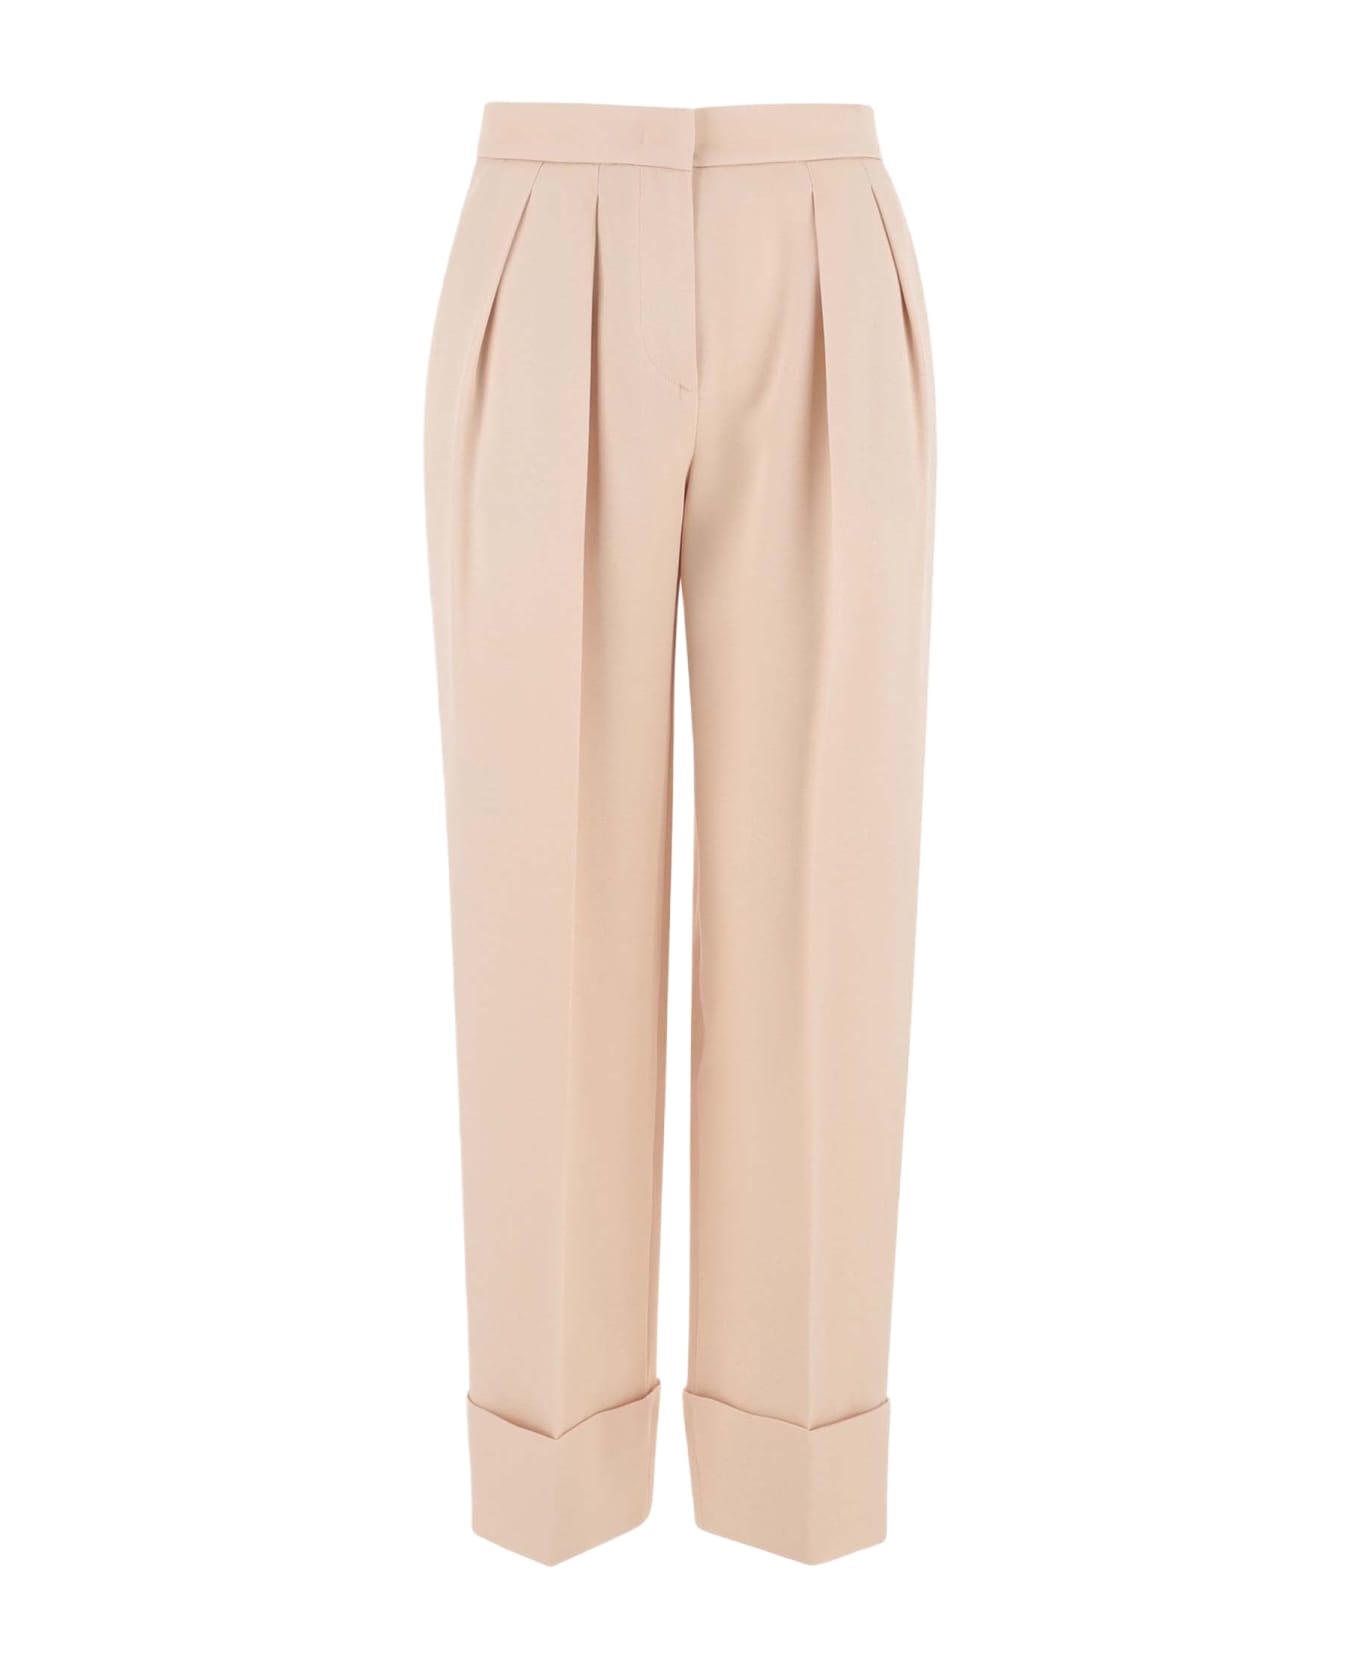 Giorgio Armani Concealed Trousers - Pink